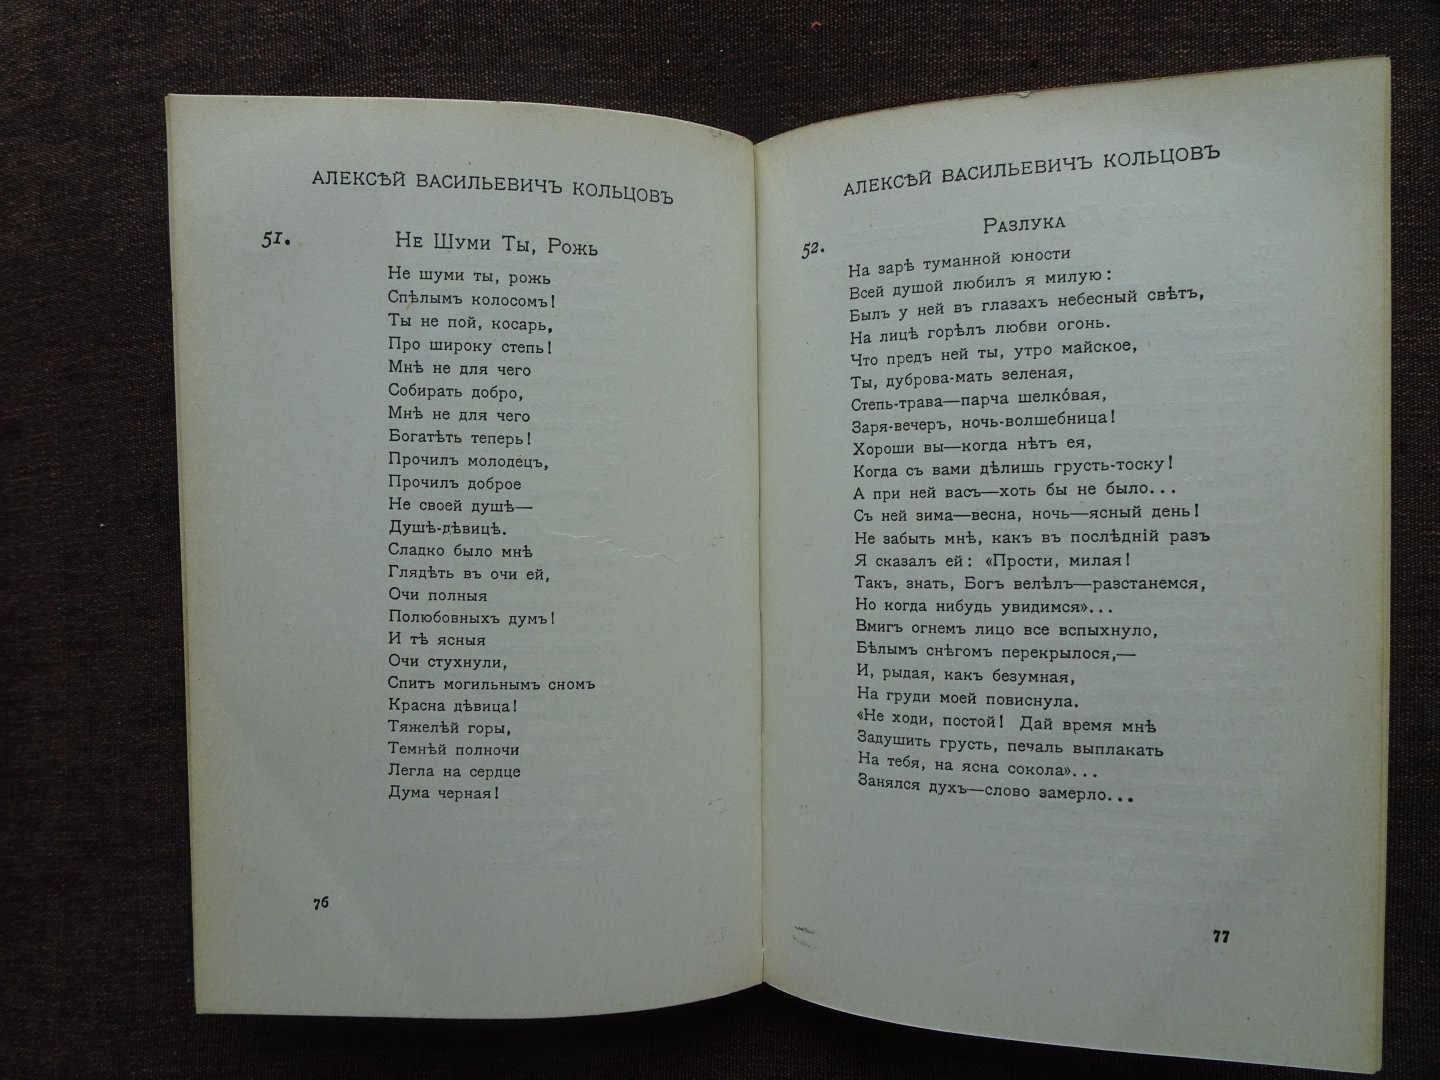 Baring, Maurice - THE OXFORD BOOK OF RUSSIAN VERSE